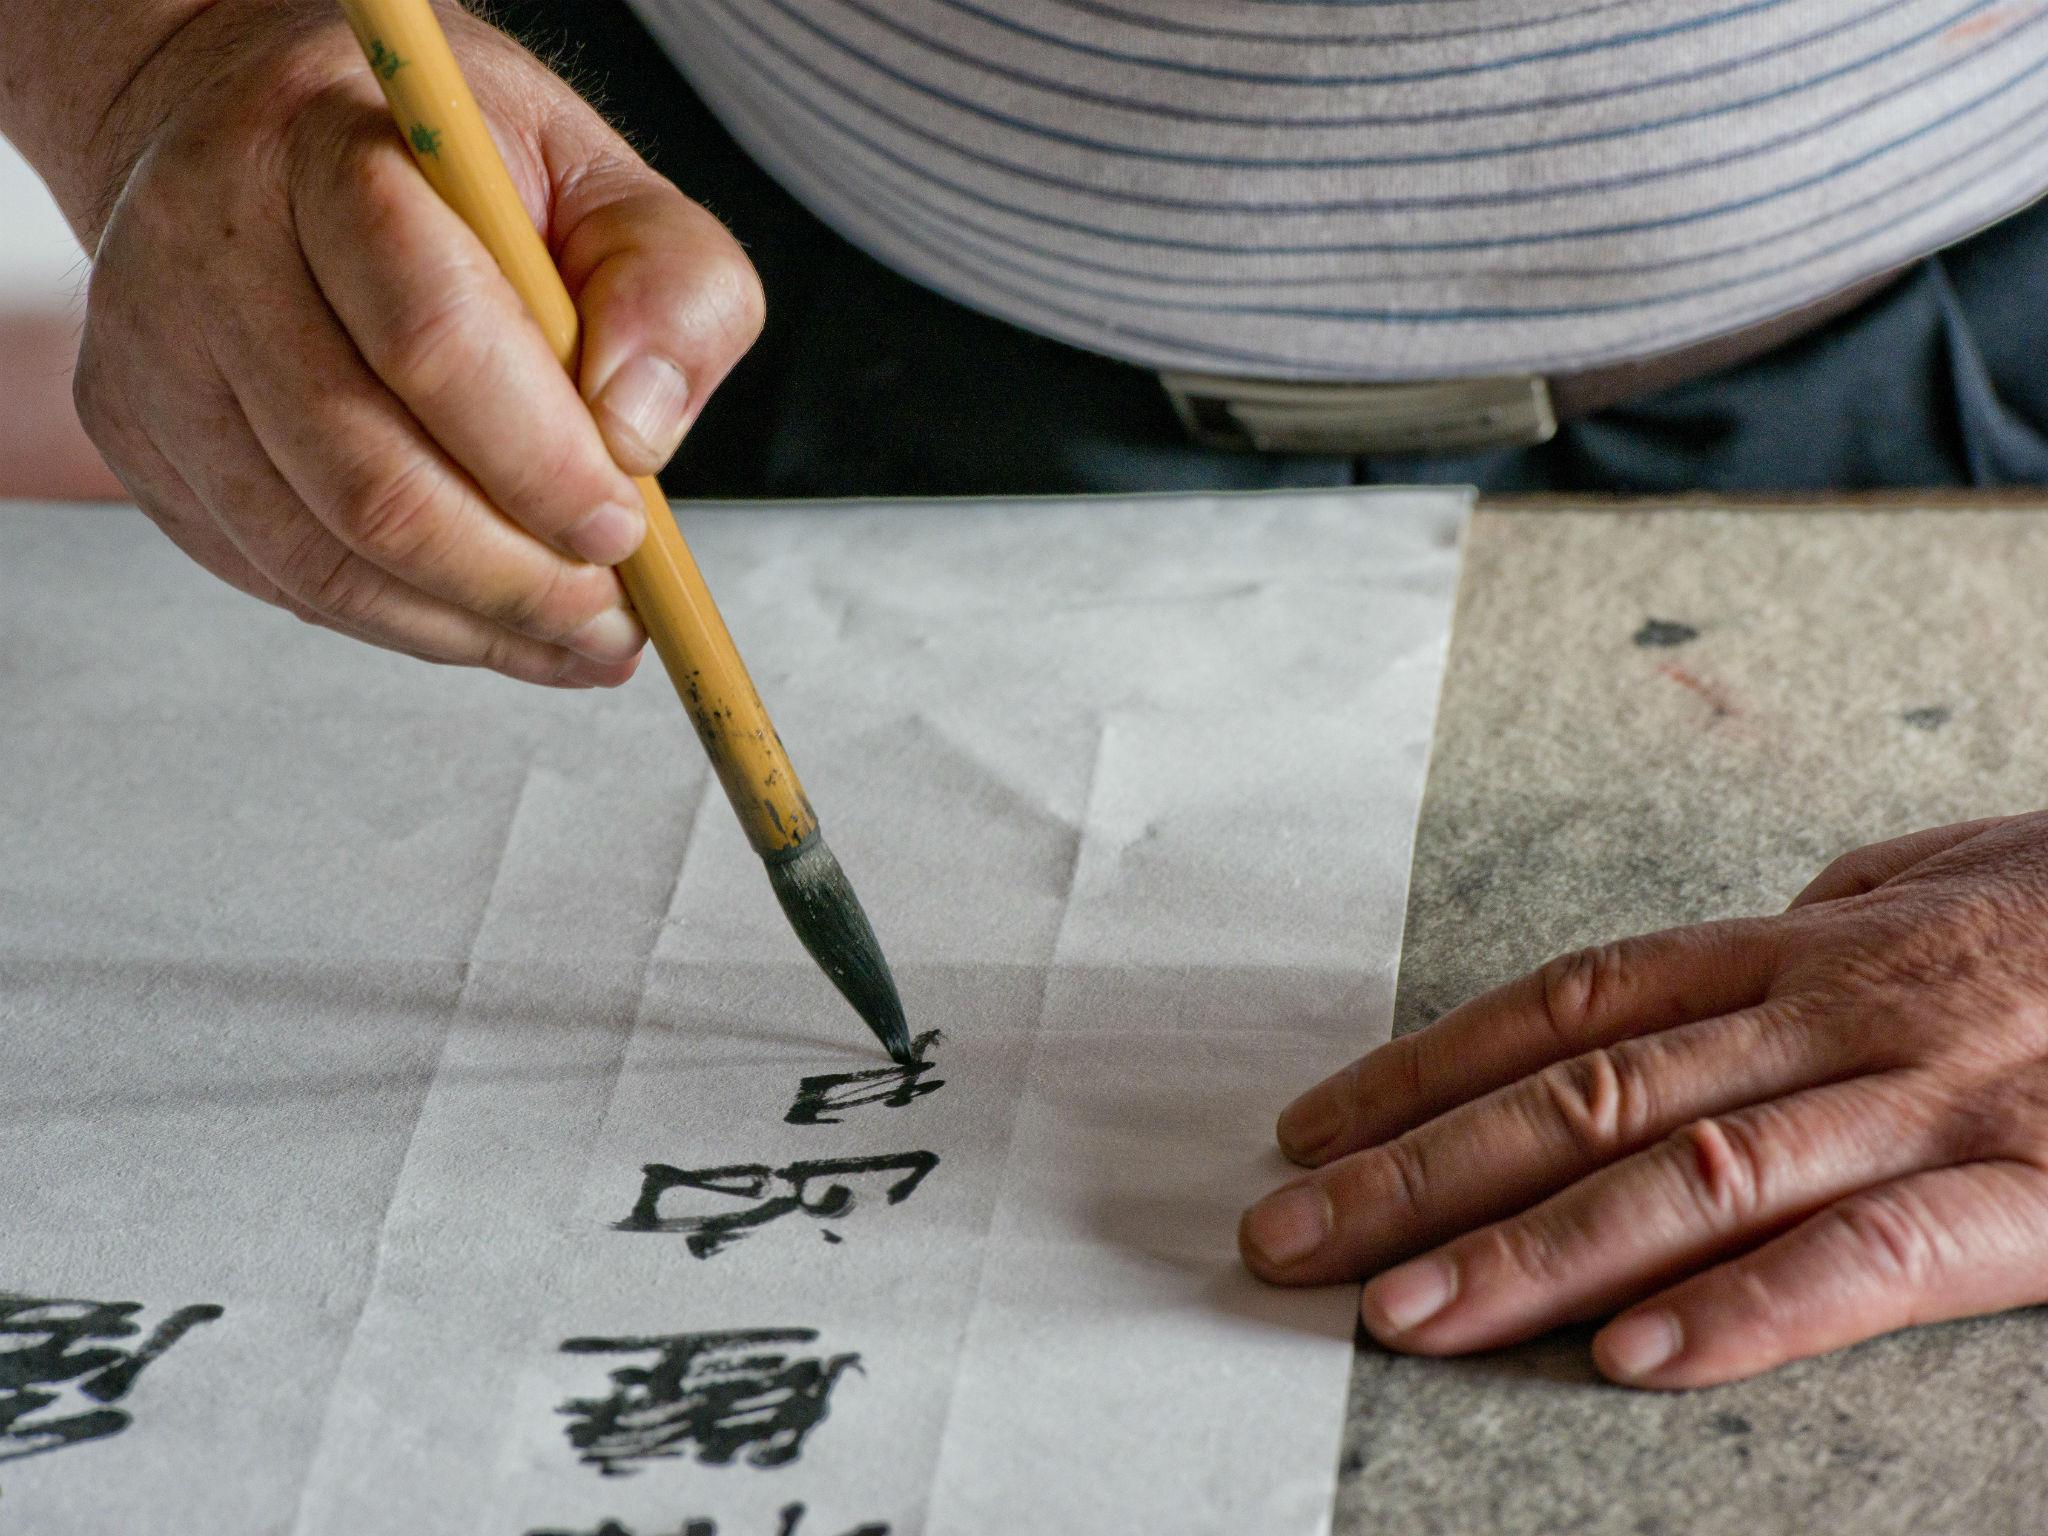 Chinese calligraphy is a traditional art form that the CAA claims Sun Ping has 'defiled'